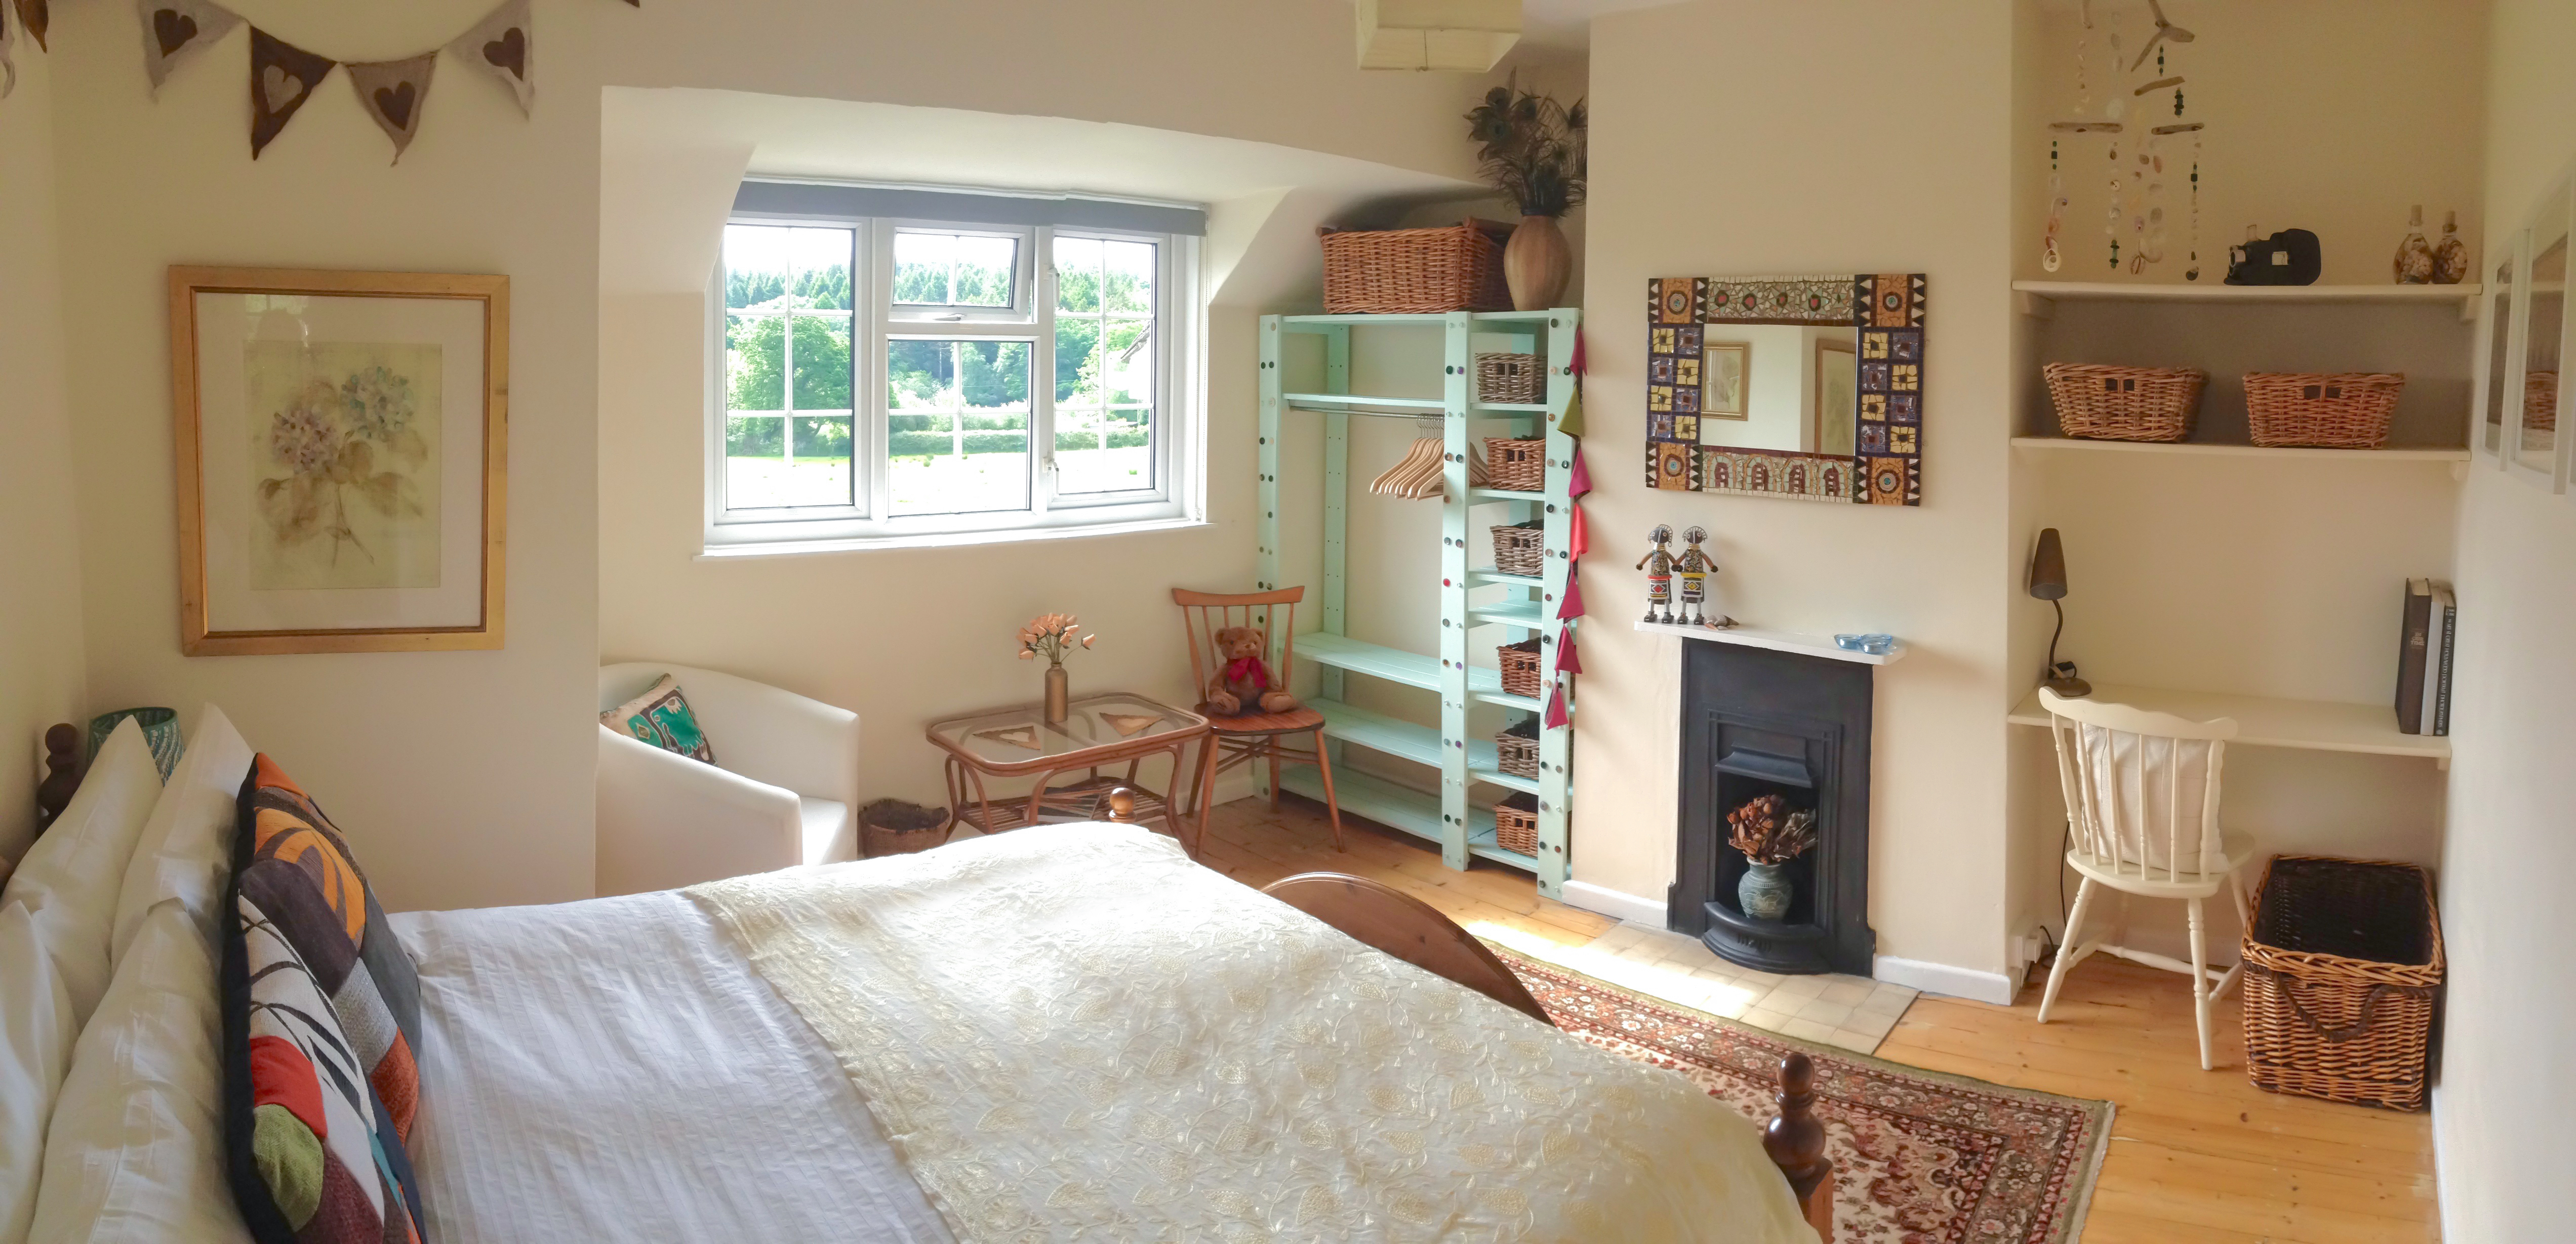 self catering holiday cottage sleeps 8 at The Pink House Lulworth in Dorset